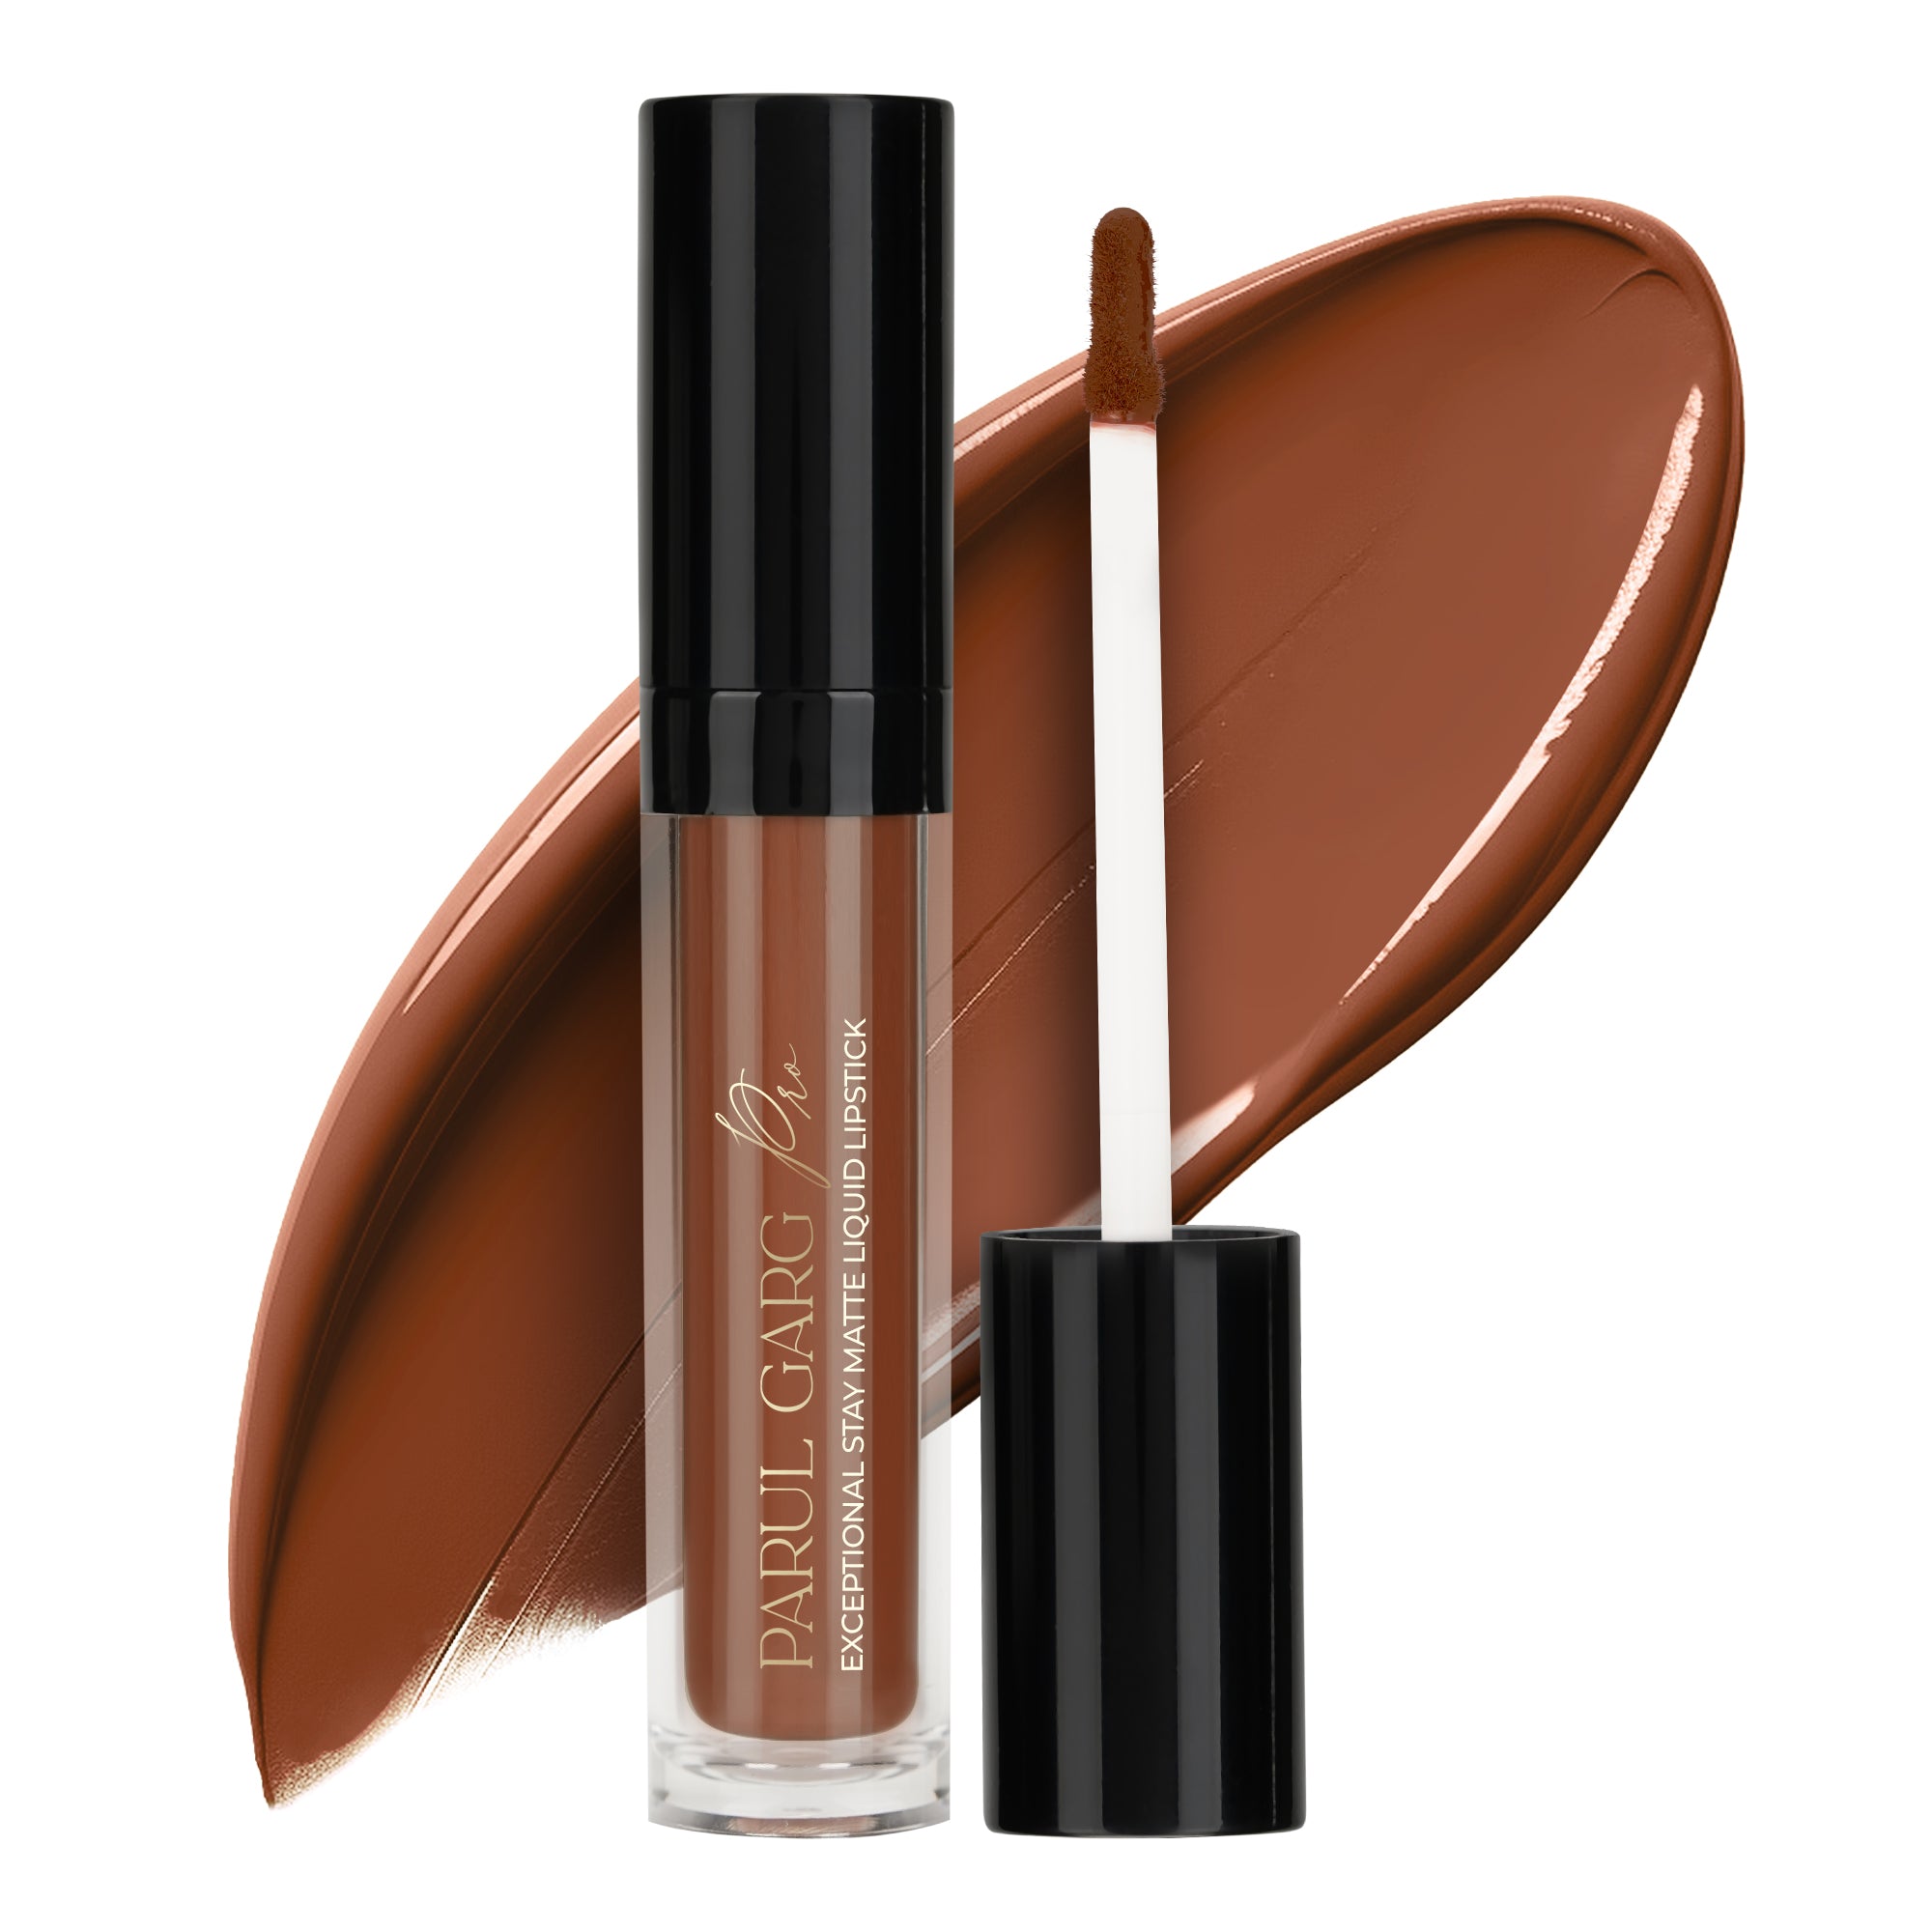 Exceptional Stay Matte Liquid Lipstick Shade: Chocolate Cosmos 03